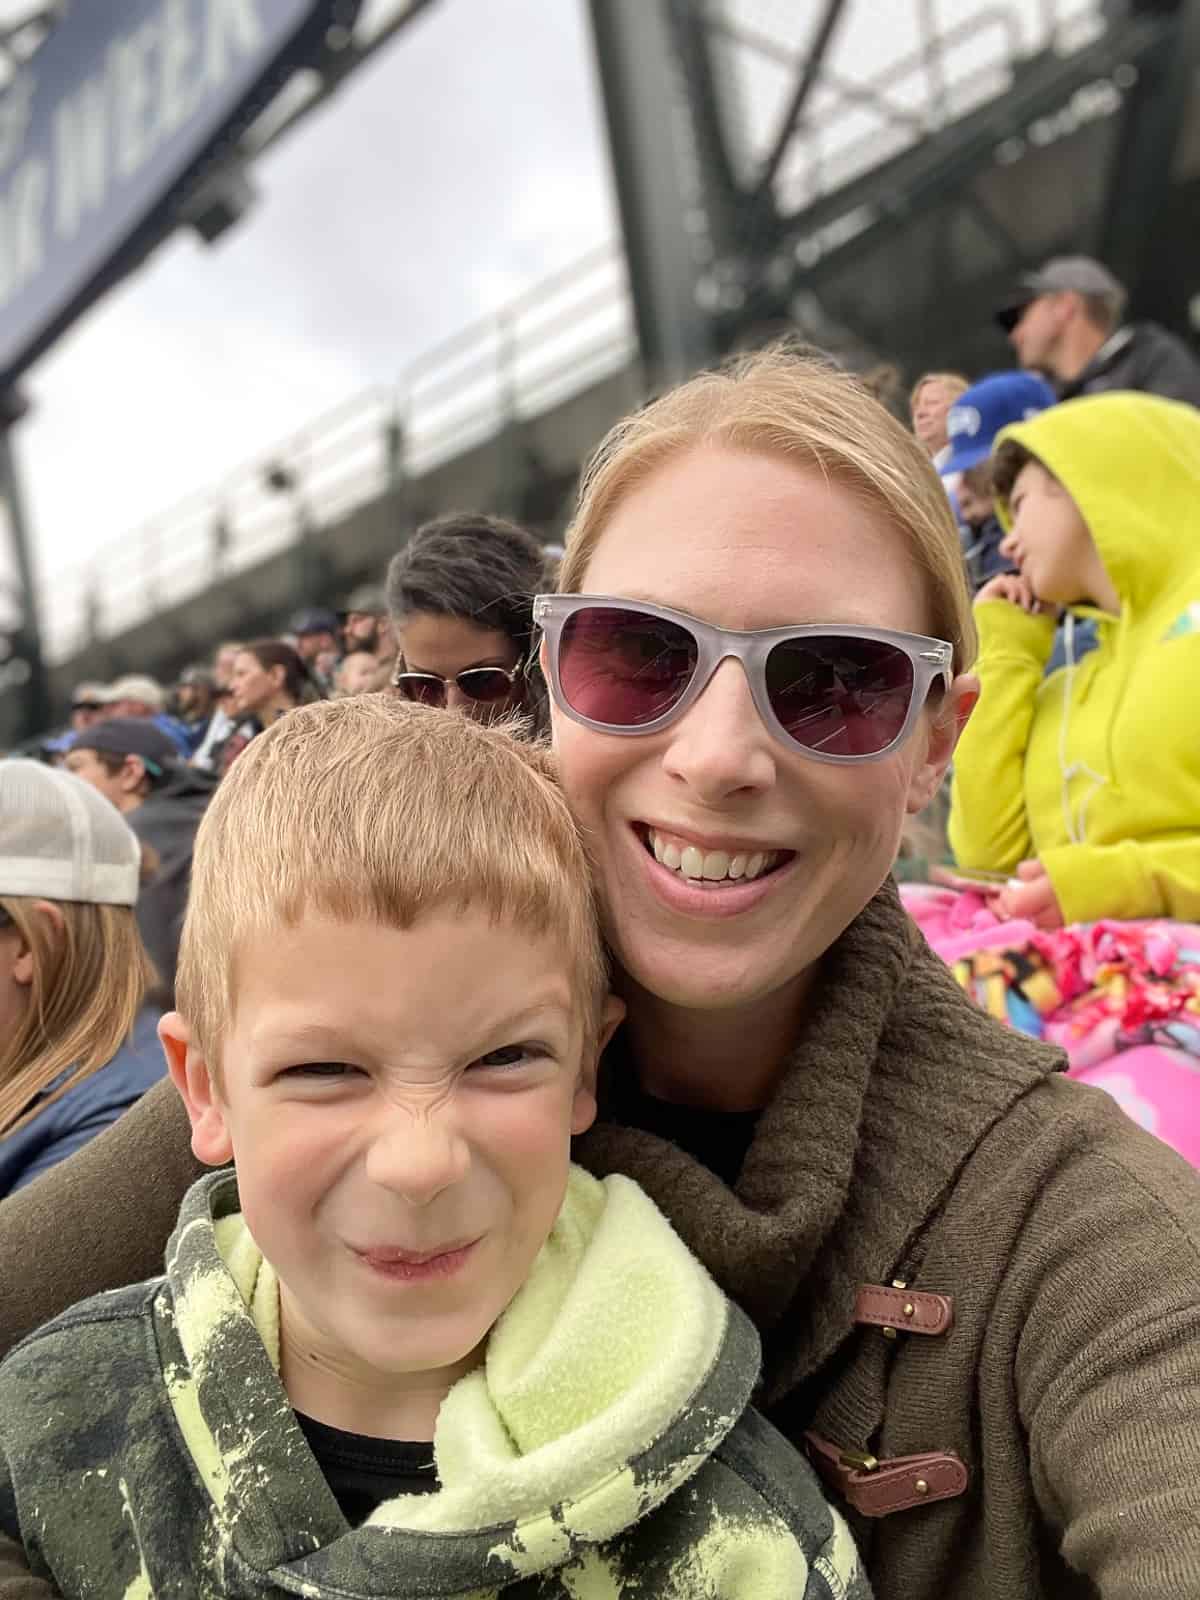 a mom and her son who has a silly looking smile at a ballpark.